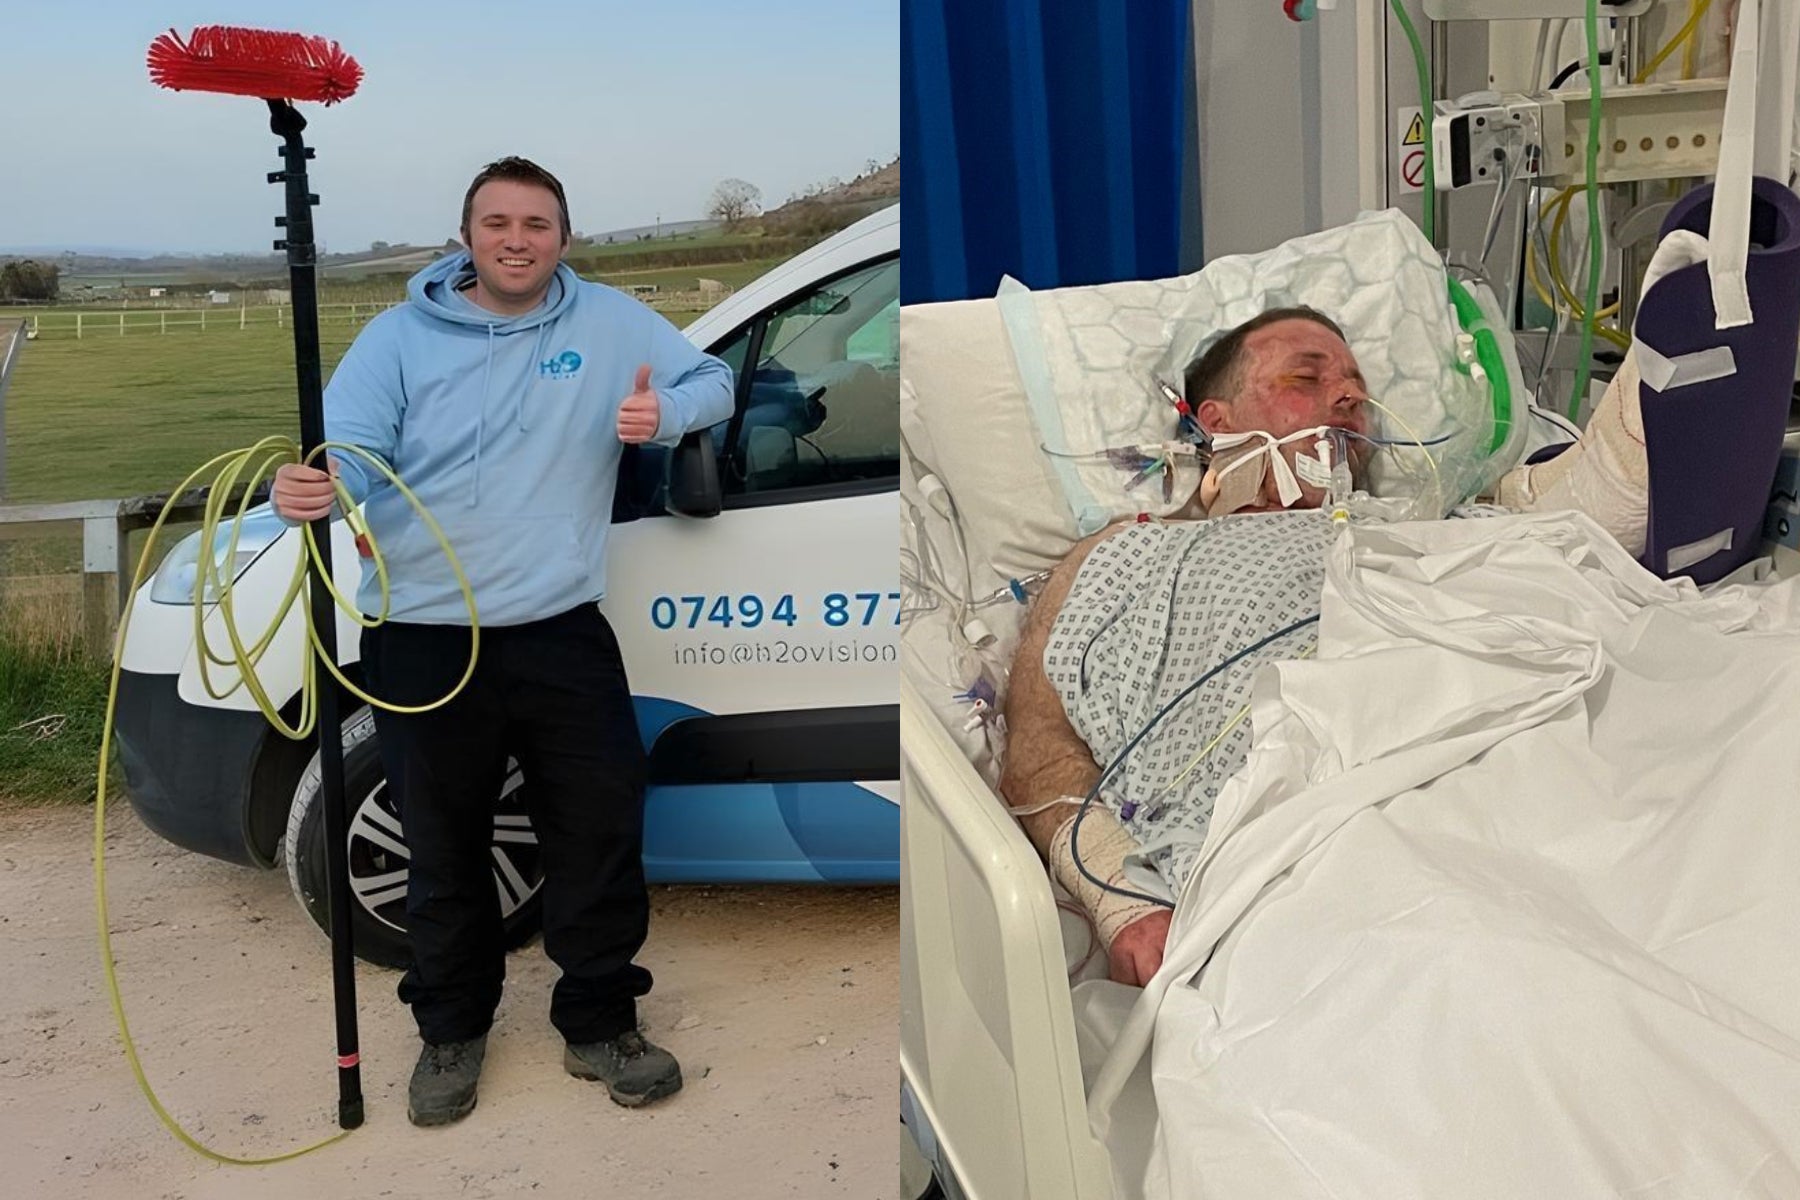 Jason Knight, 34, from Westbury, Wiltshire, survived a 33,000-volt electric shock which left doctors no choice but to amputate his arm (Collect/PA Real Life)